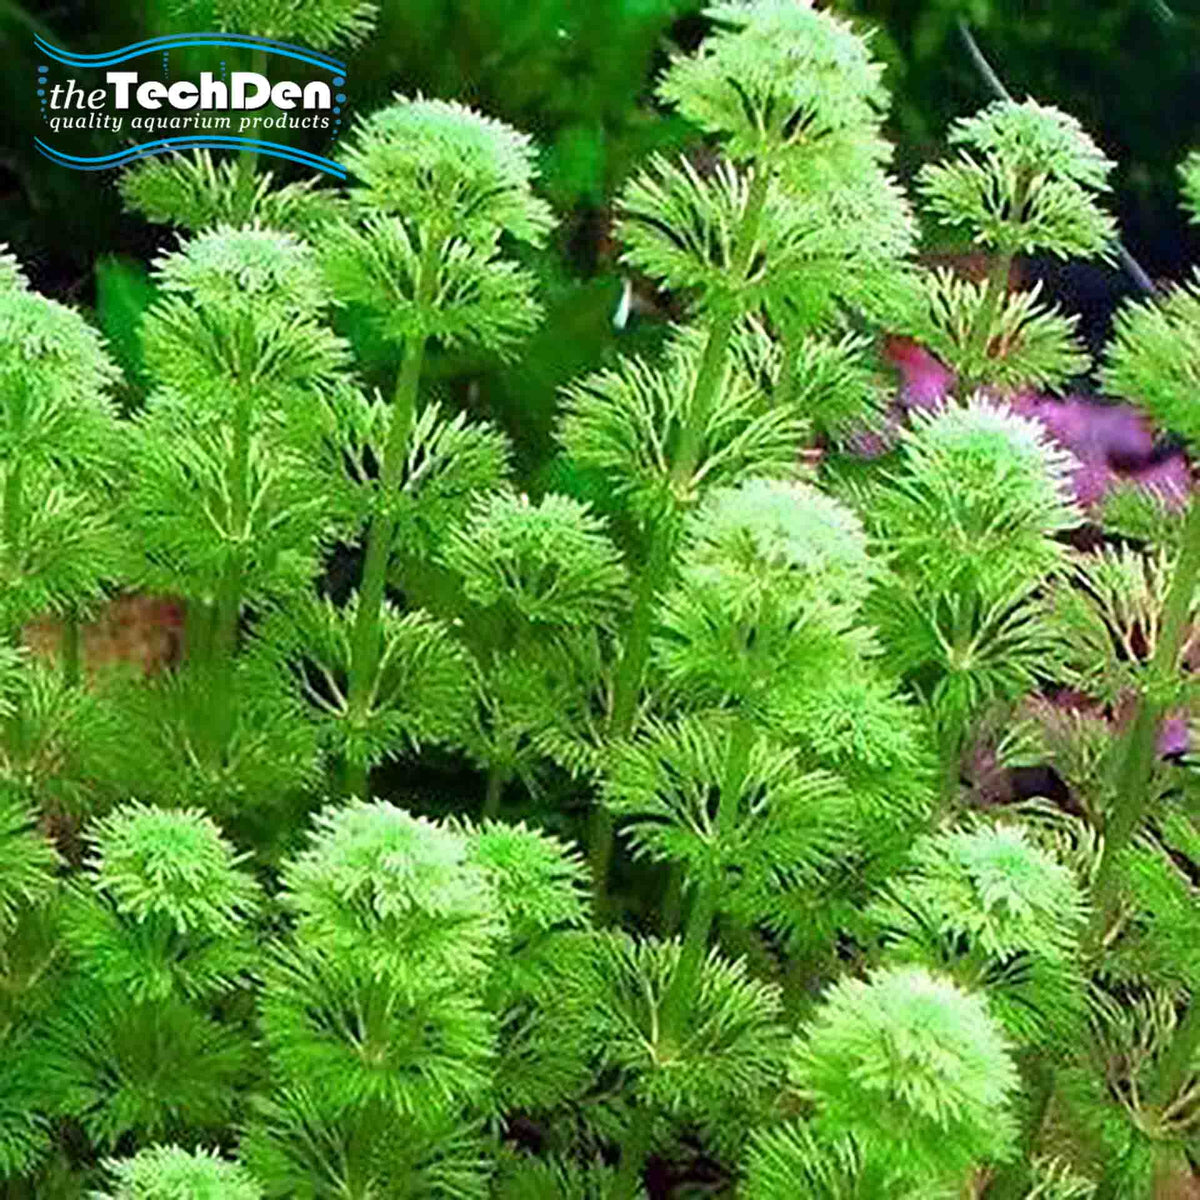 Plant Bunches $14 - True Aquatic - Submersed Grown - (No Online Purchases)